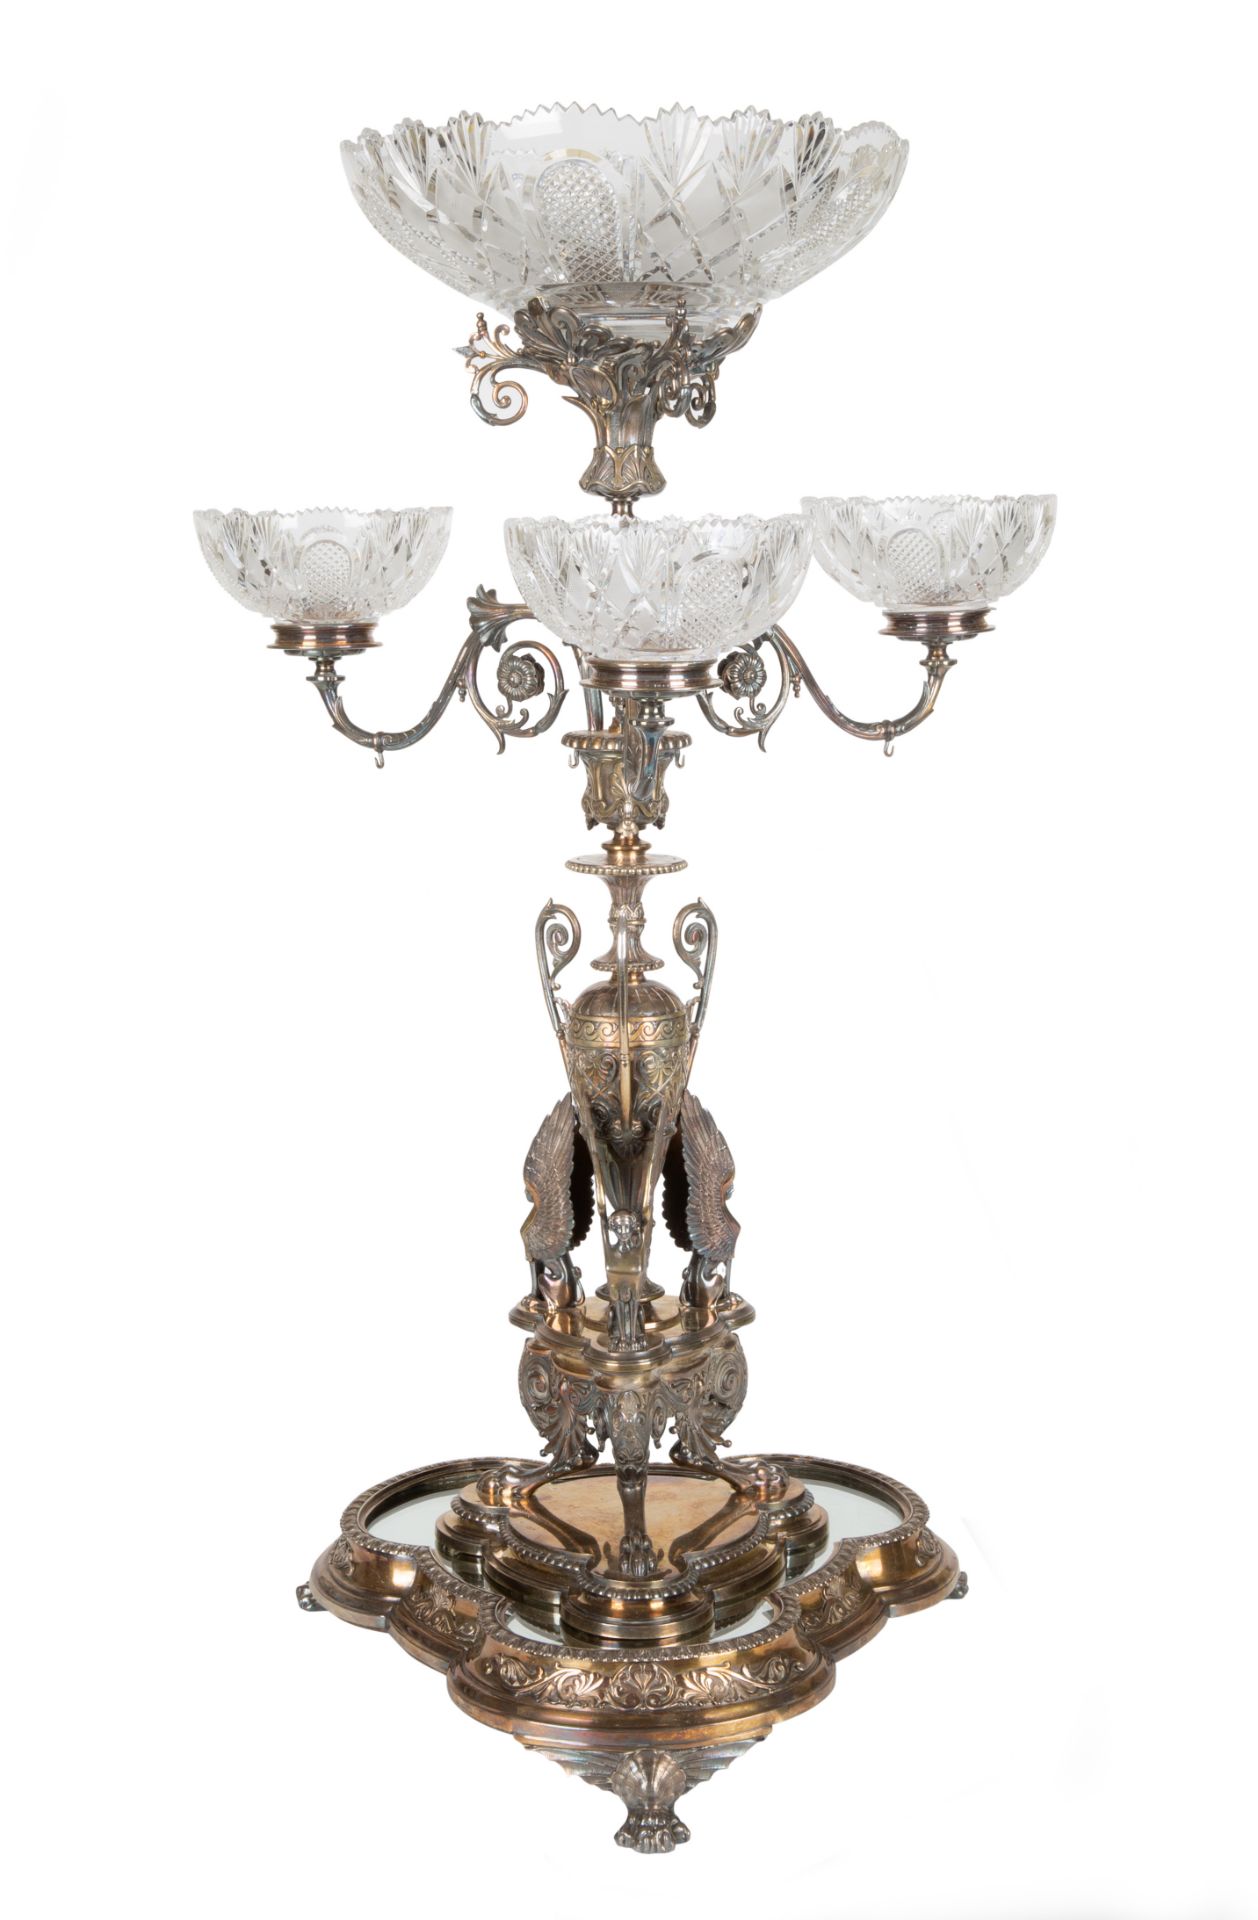 AN BRITISH SILVER-PLATED AND CUT GLASS TWO-PIECE EPERGNE, PROBABLY DESIGNED BY AUGUSTE ADOLPHE WILLM